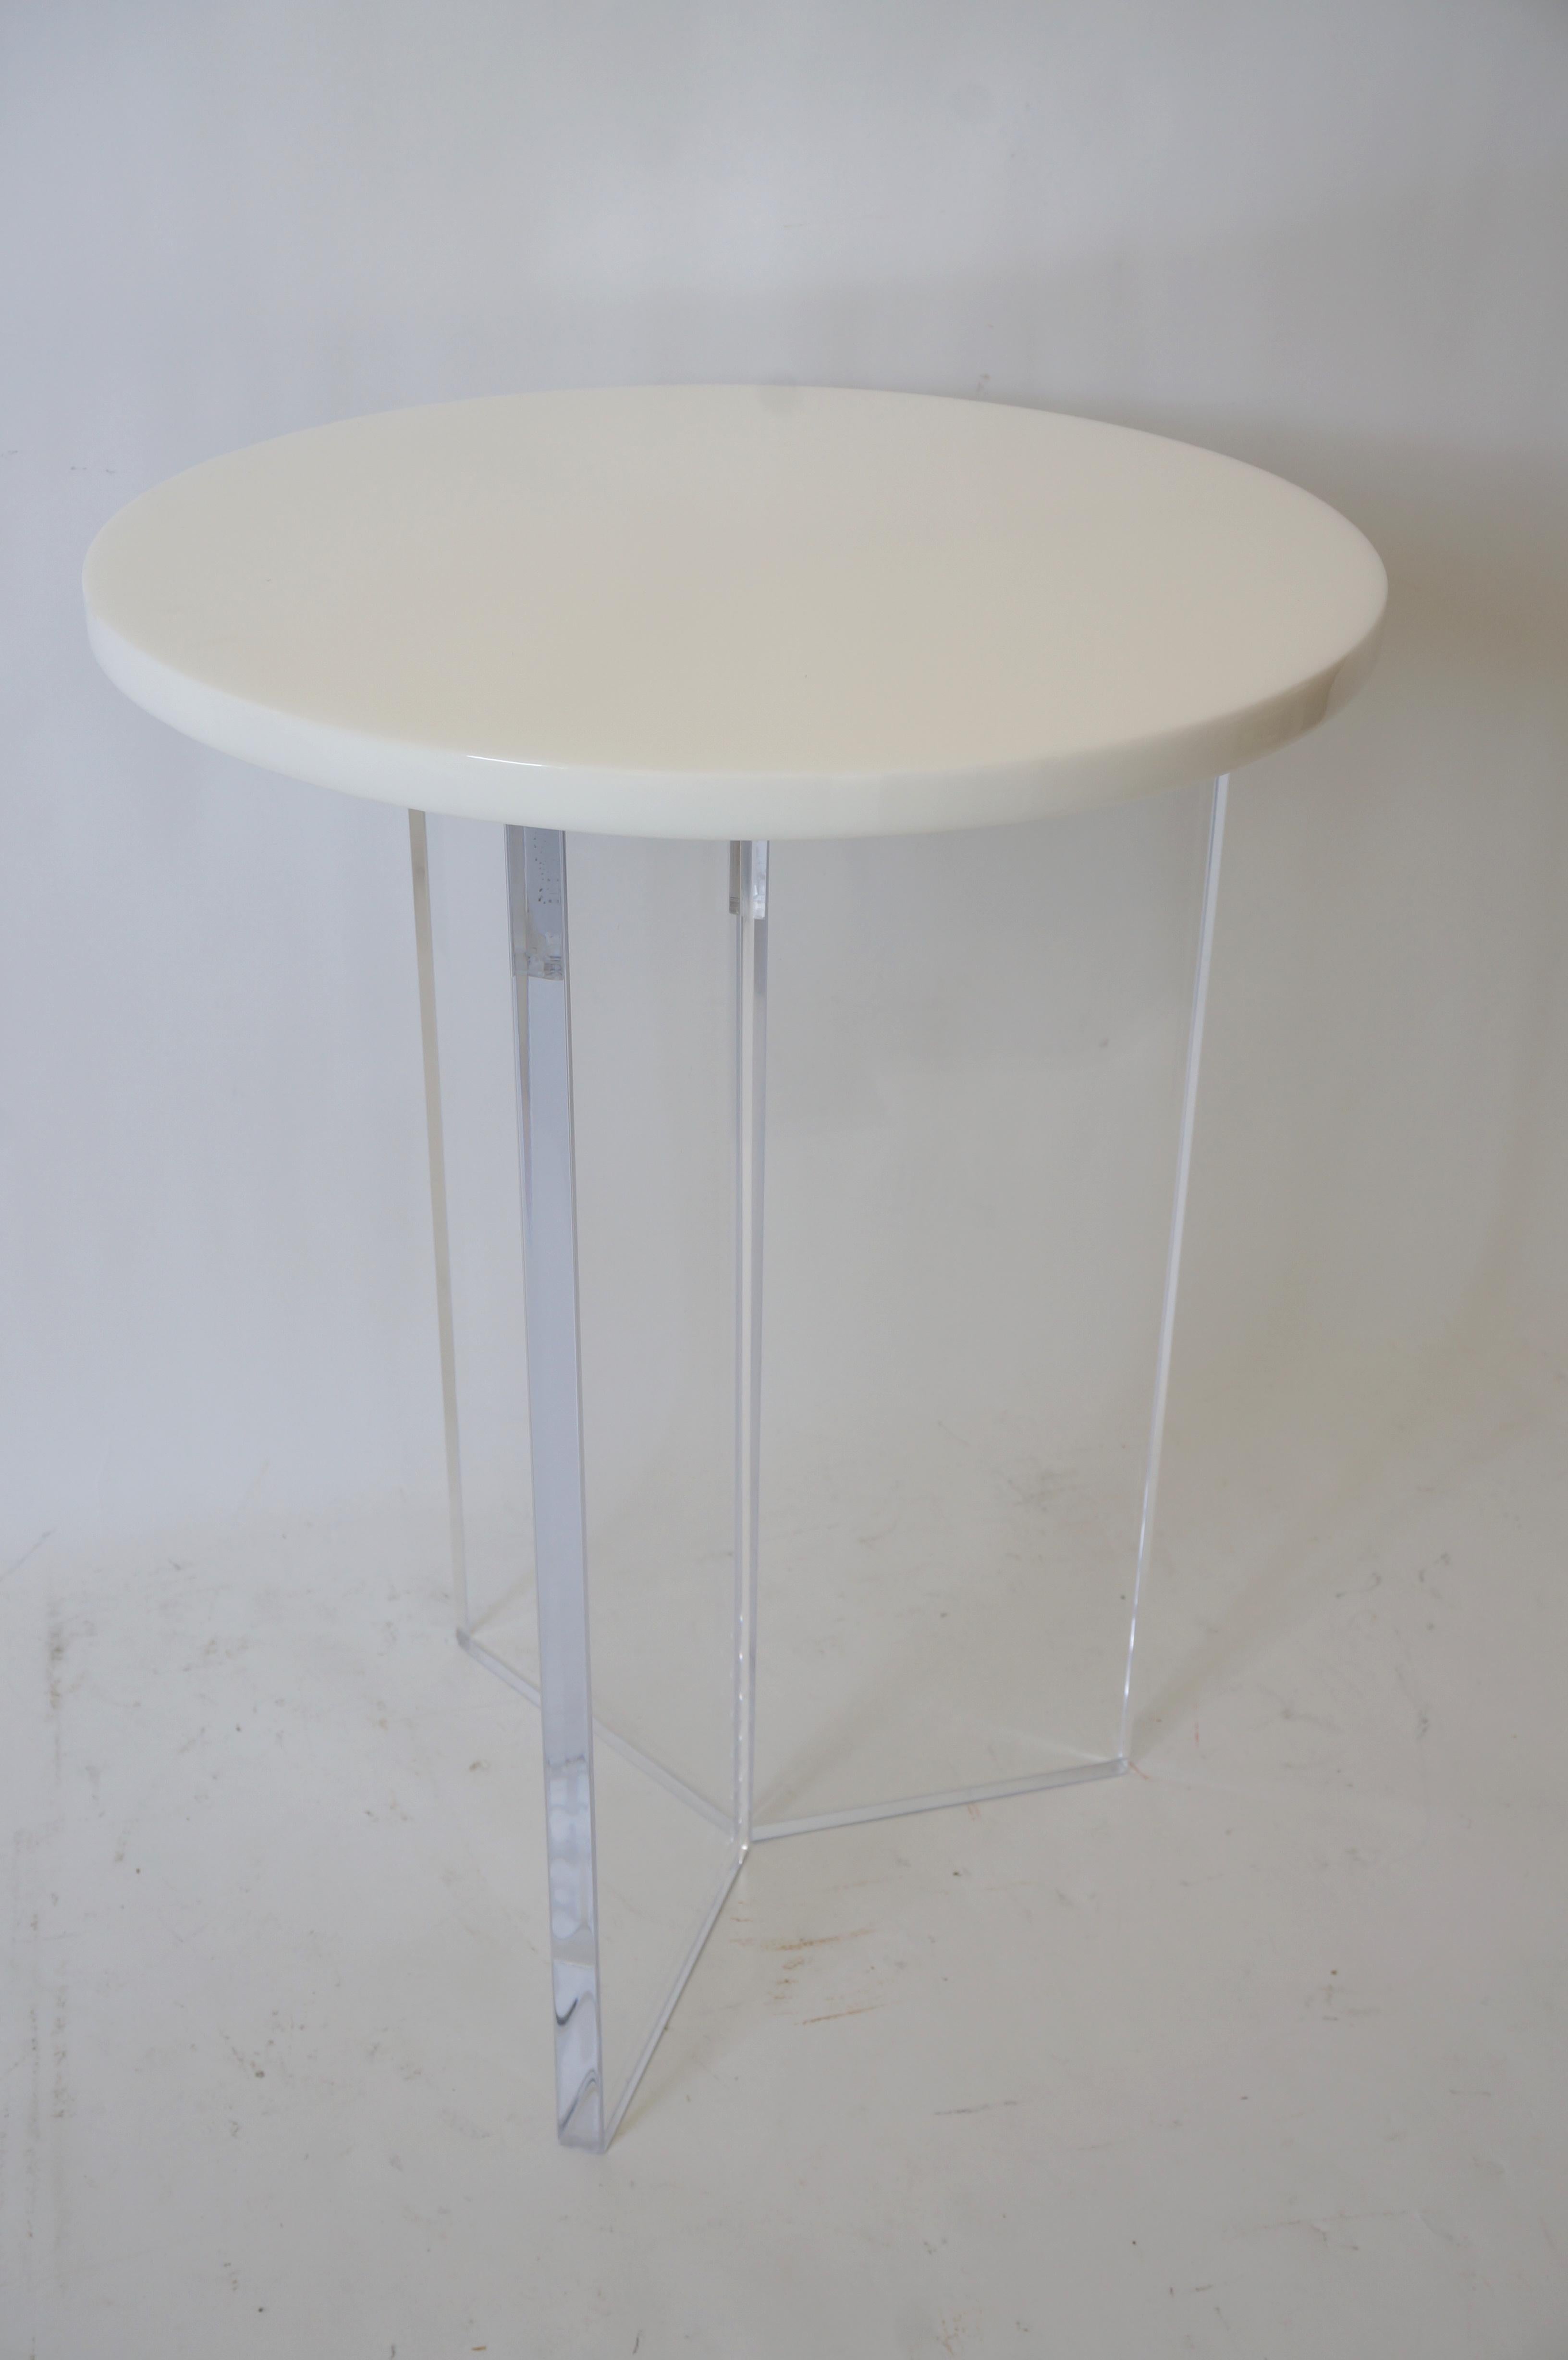 This stylish, chic and cleaned lined lucite table can be used as an end or side table.